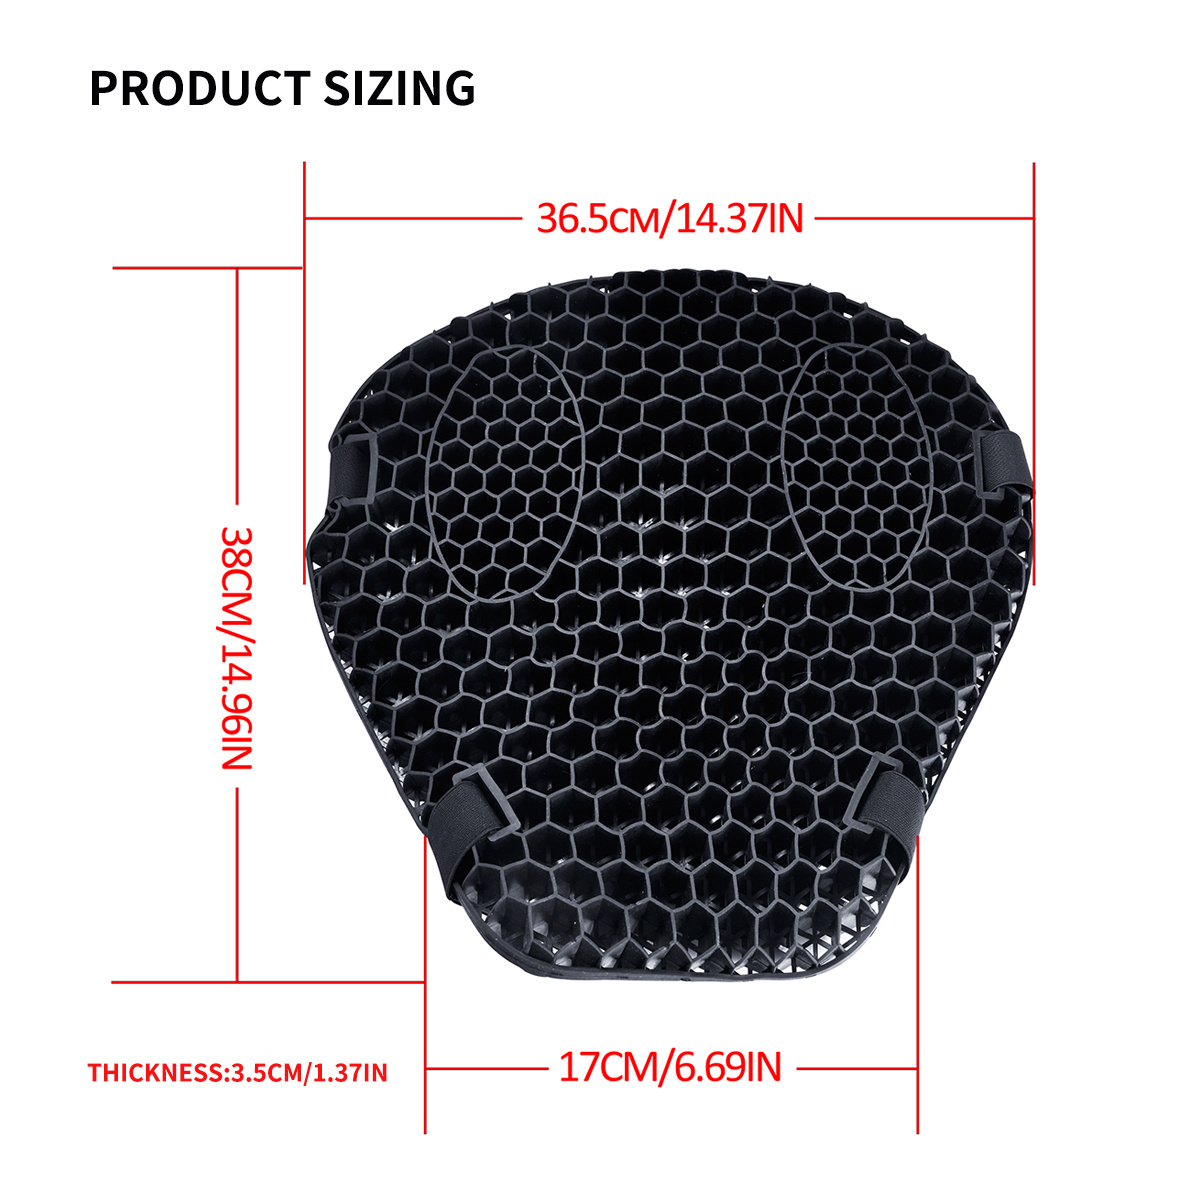 Motorcycle Gel Seat Pad Shock Absorption for Long Distance Rides